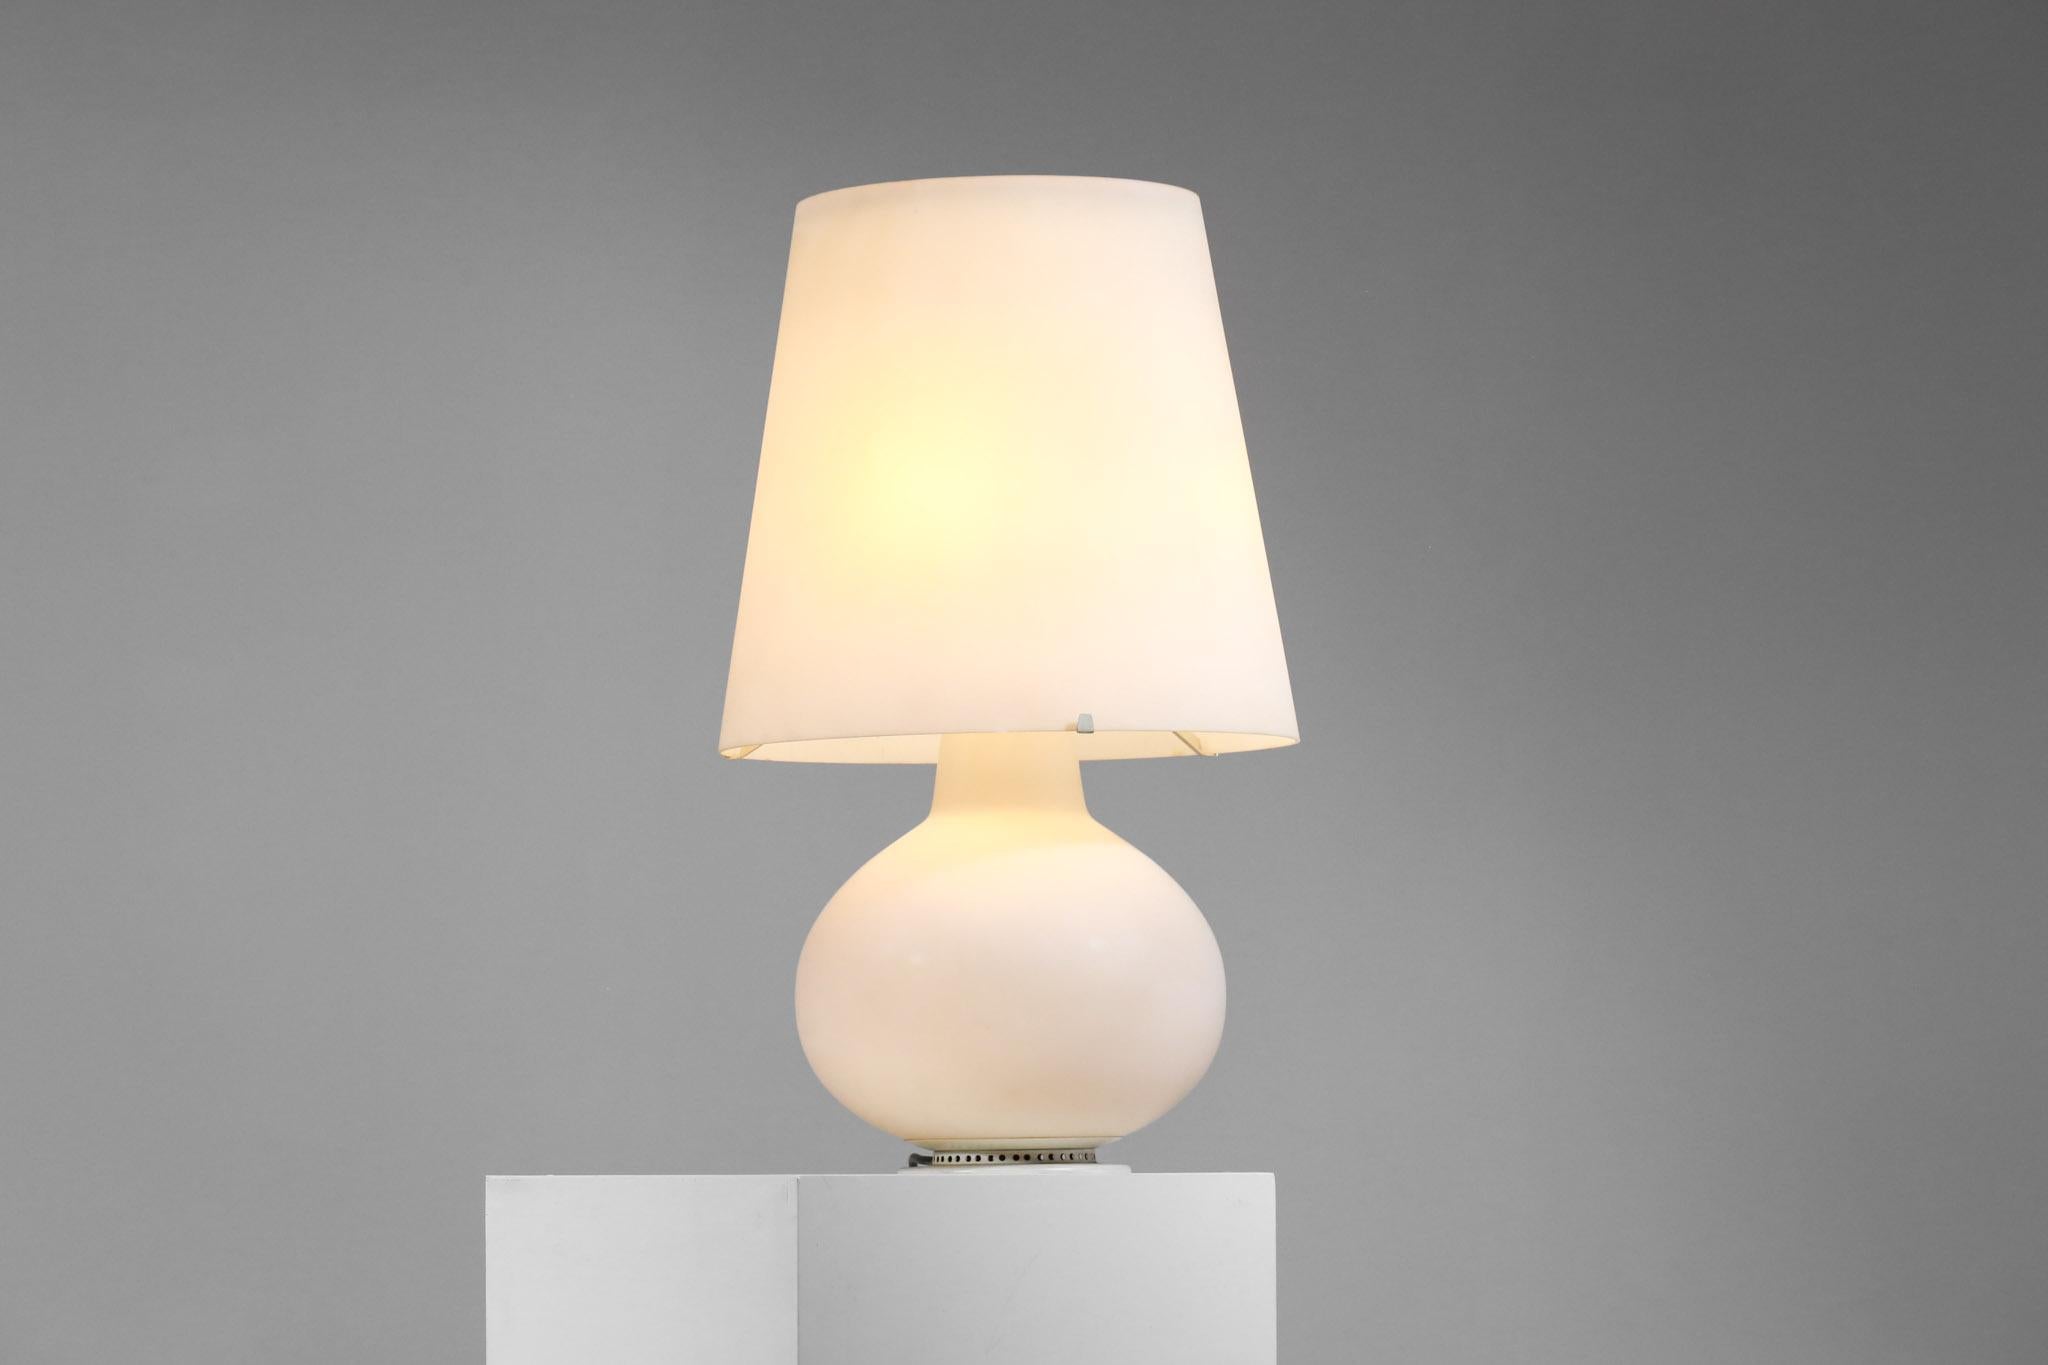 Italian desk lamp, large model, from the 1960s.
Designed by Max Ingrand for Fontana Arte. 
Structure and shade in white opaline.
Opaline shows signs of wear and tear.